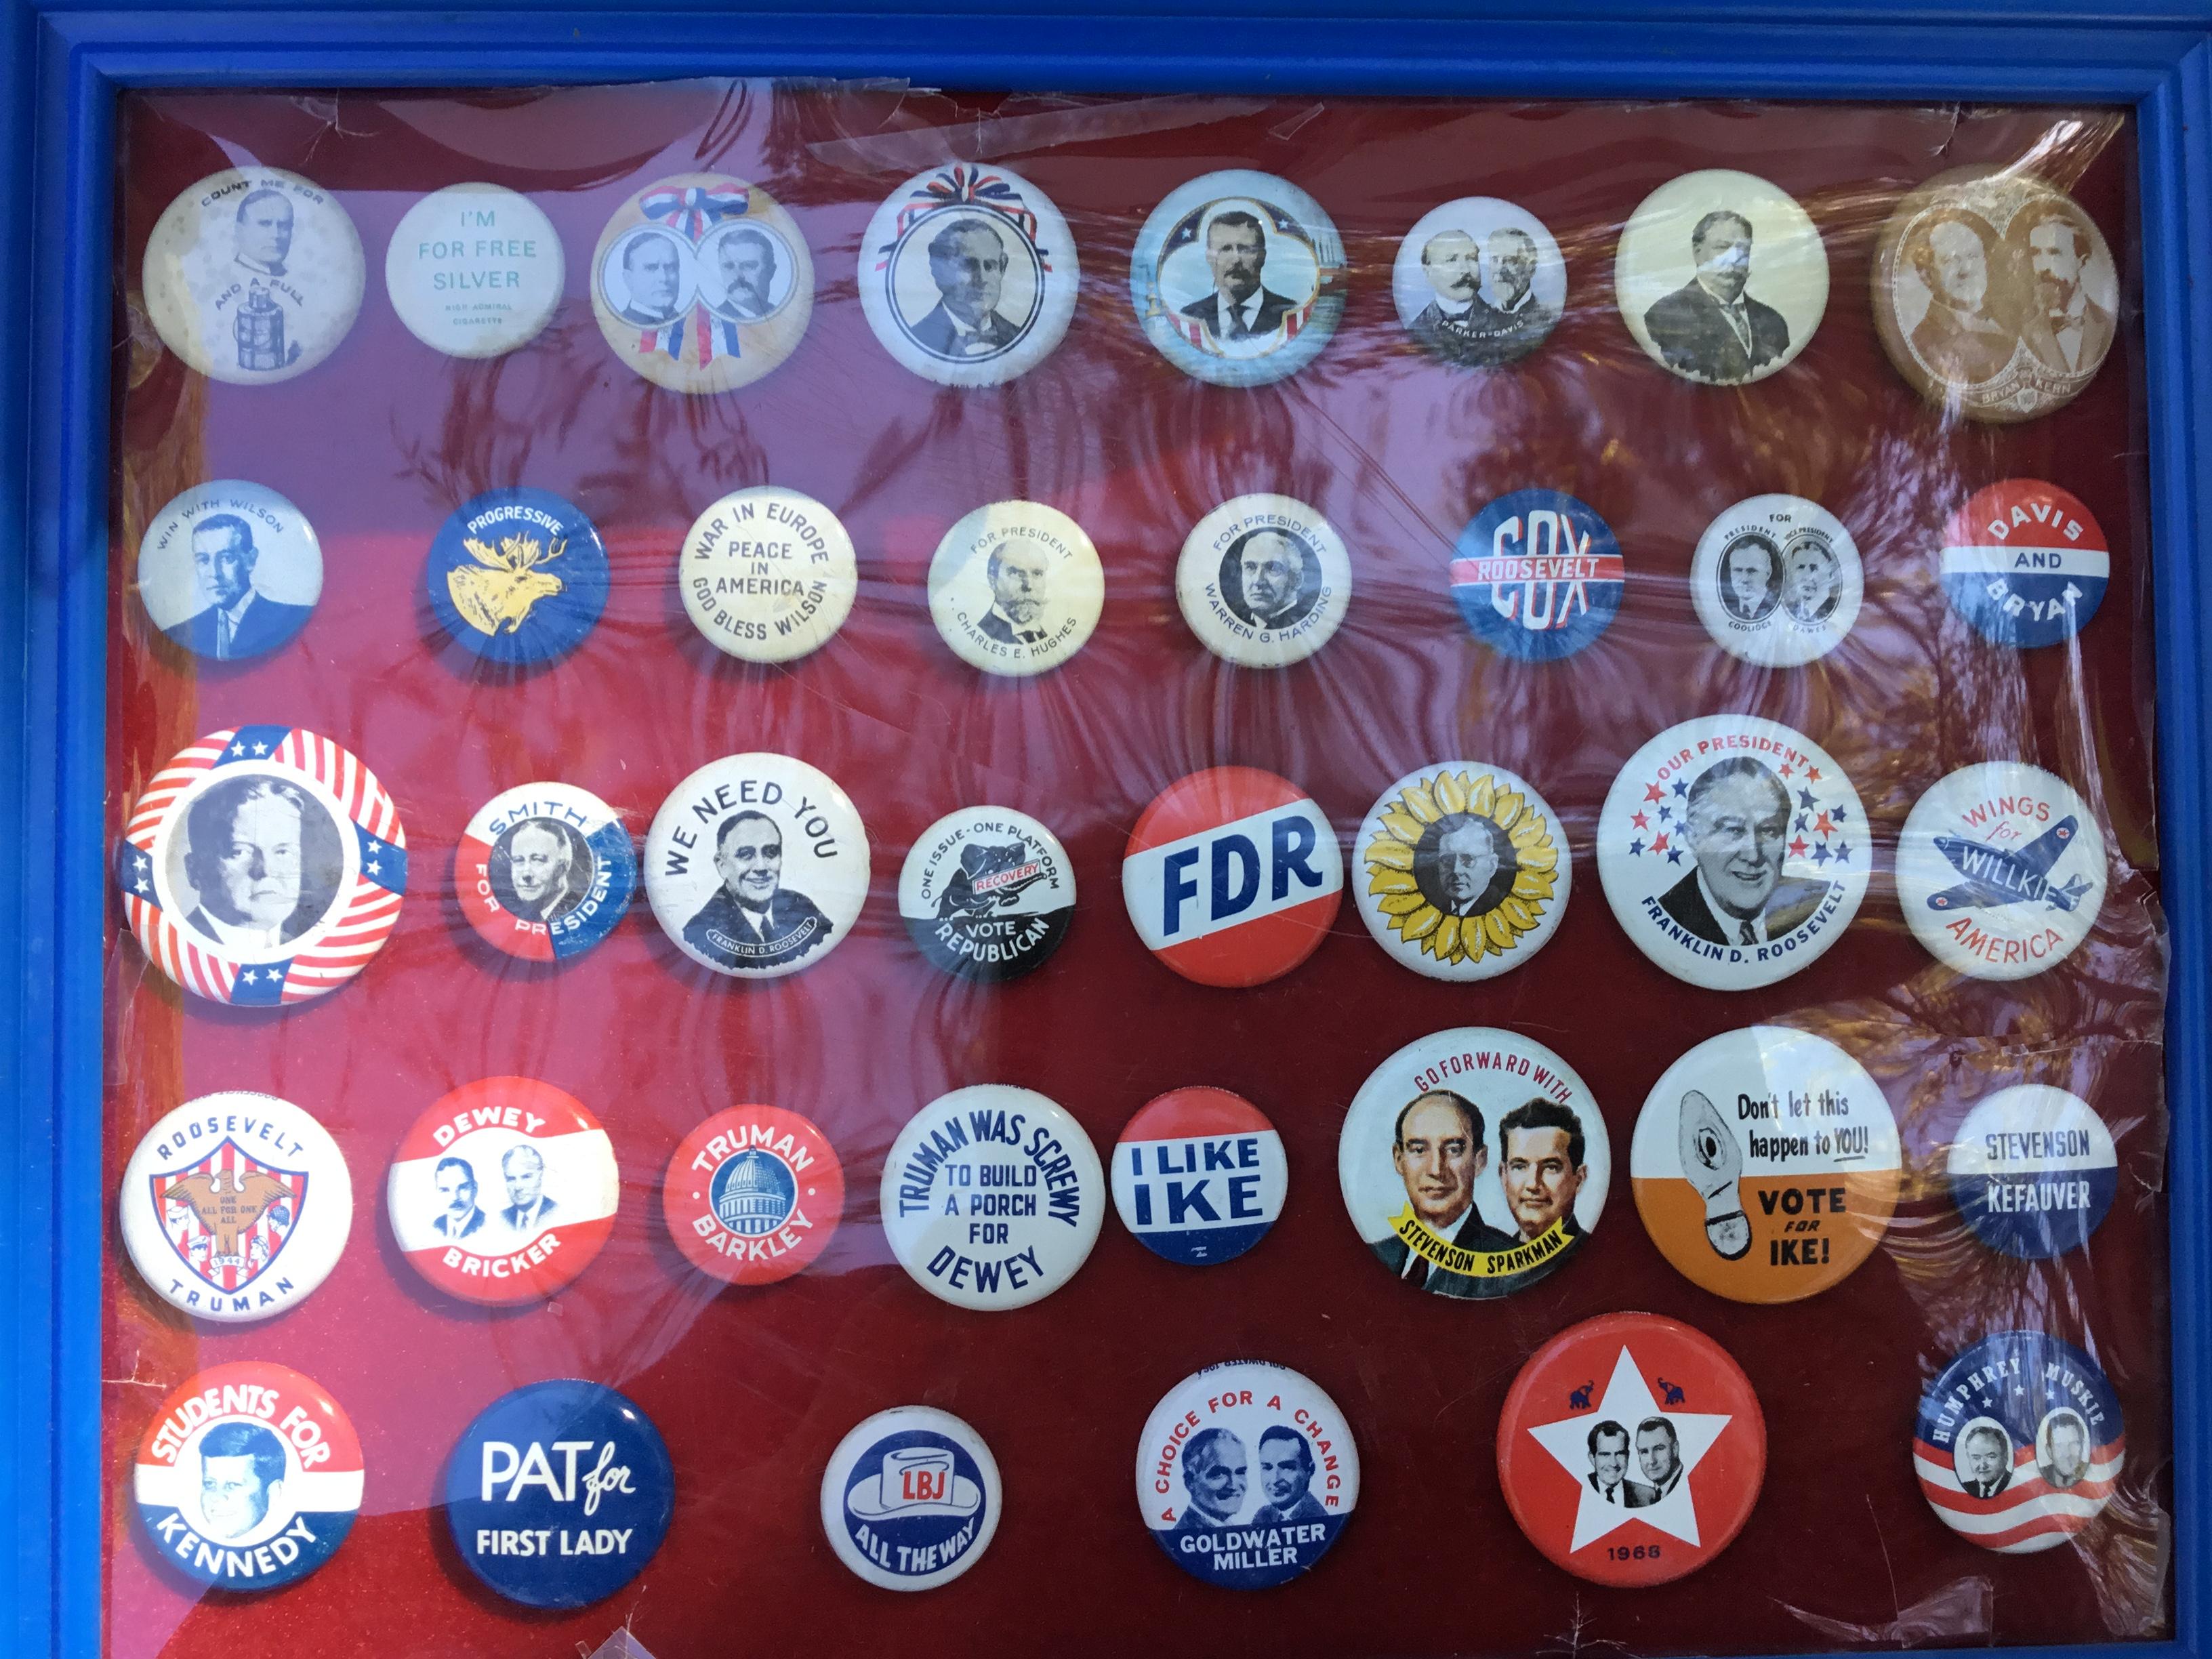 Group of Presidential buttons in a plastic frame; 38 total buttons